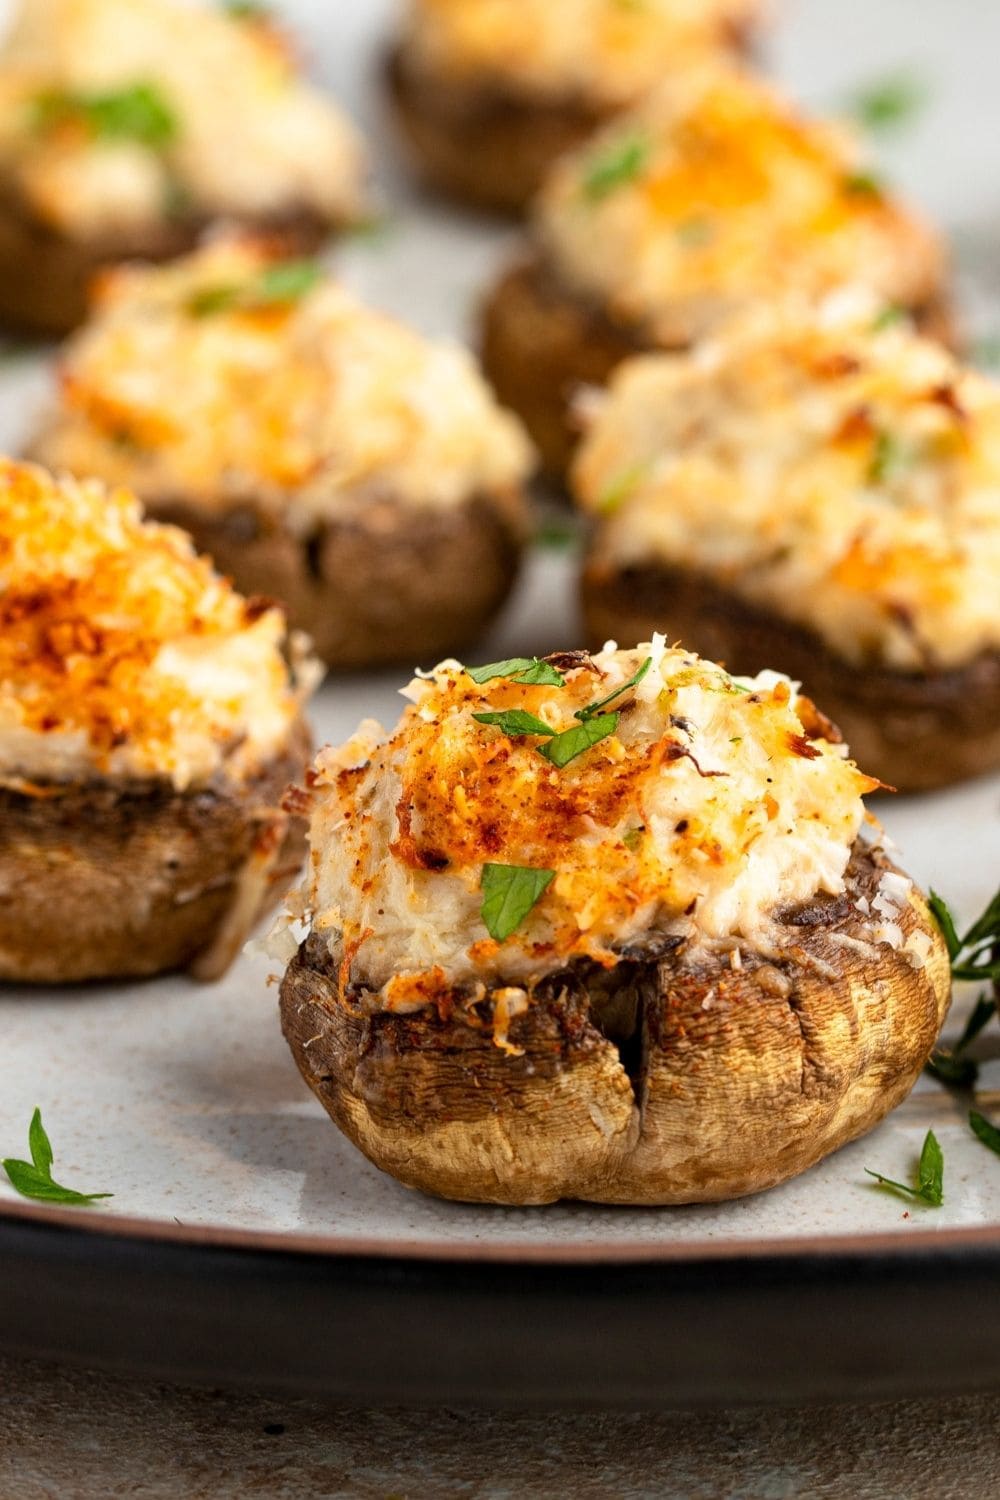 Mushroom stuffed with crab meat with mayo and parmesan cheese. 